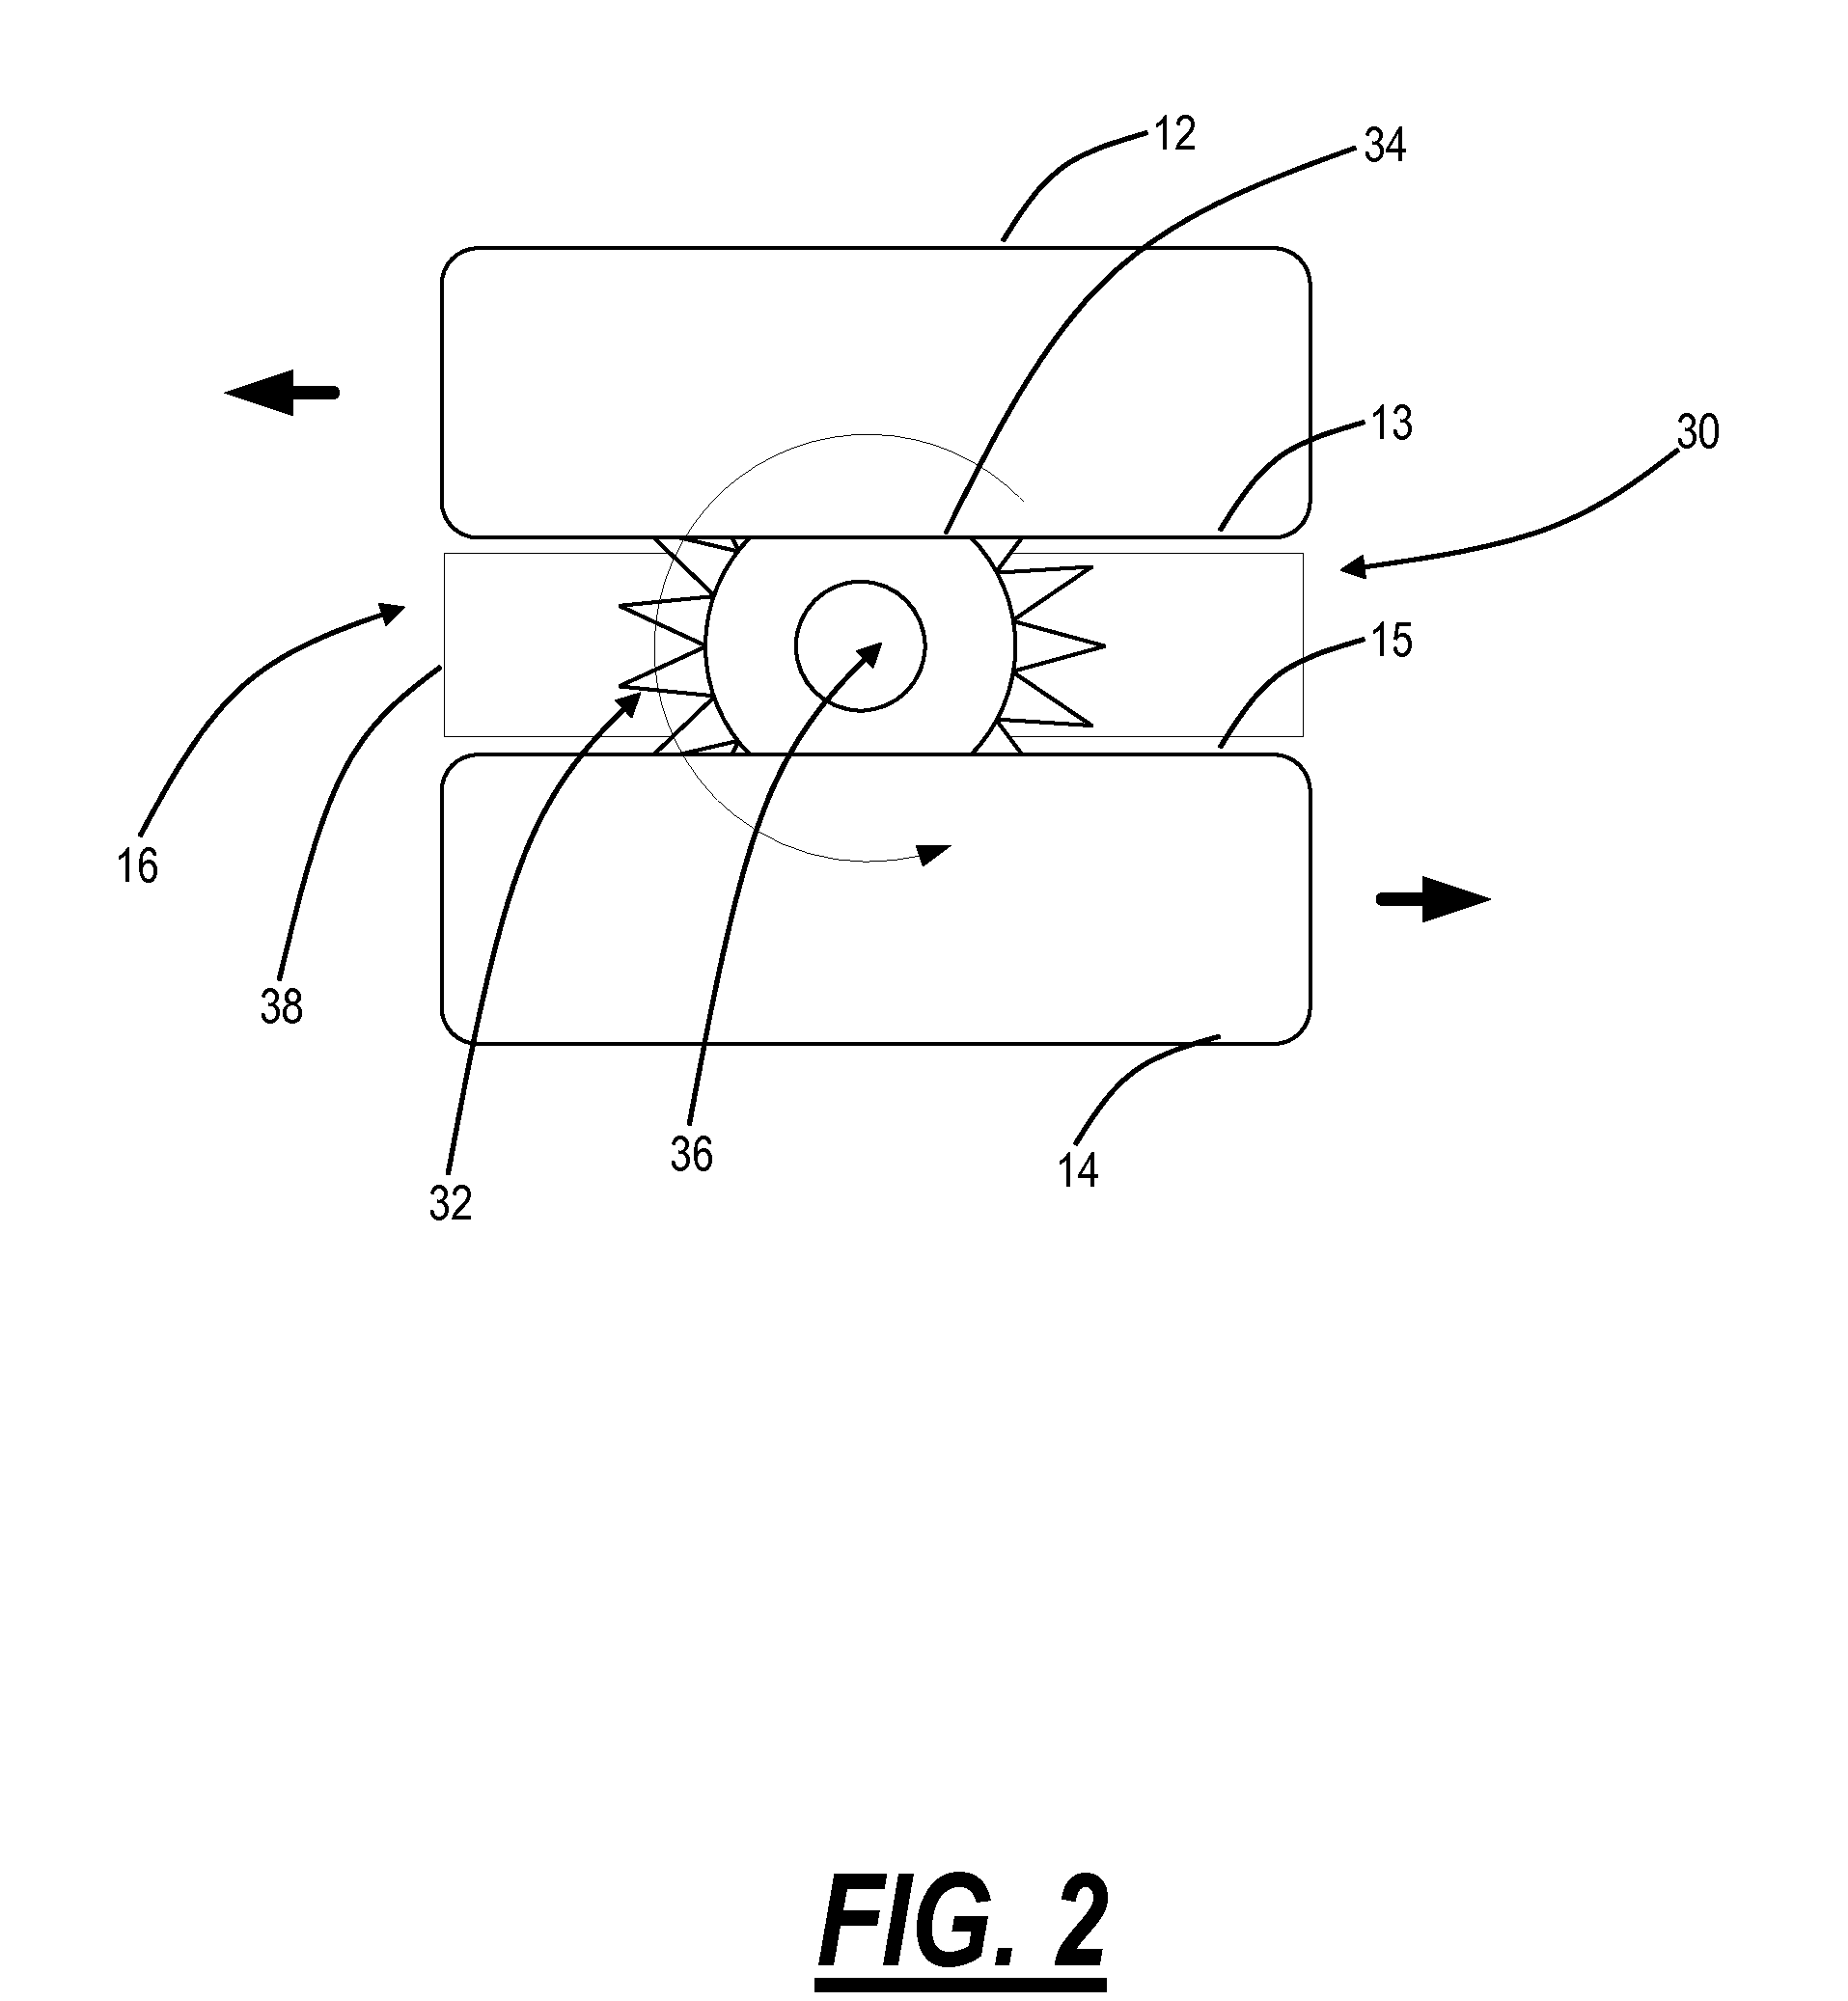 Surgical implant device for the translation and fusion of a facet joint of the spine